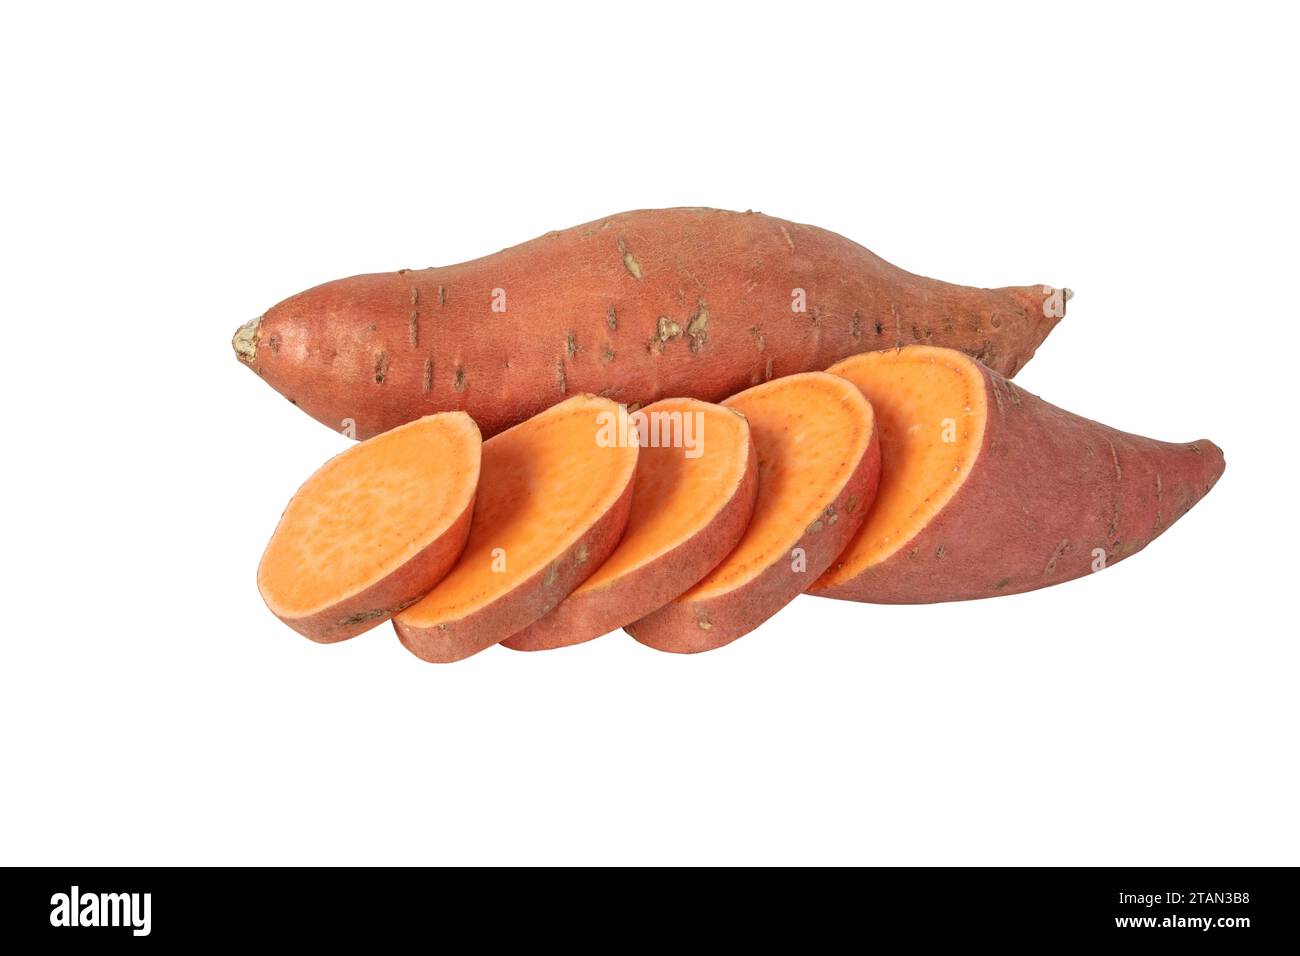 Sweet potato or boniato whole and sliced tubes with red skin and yellow flesh isolated on white. Vegetable food staple. Stock Photo